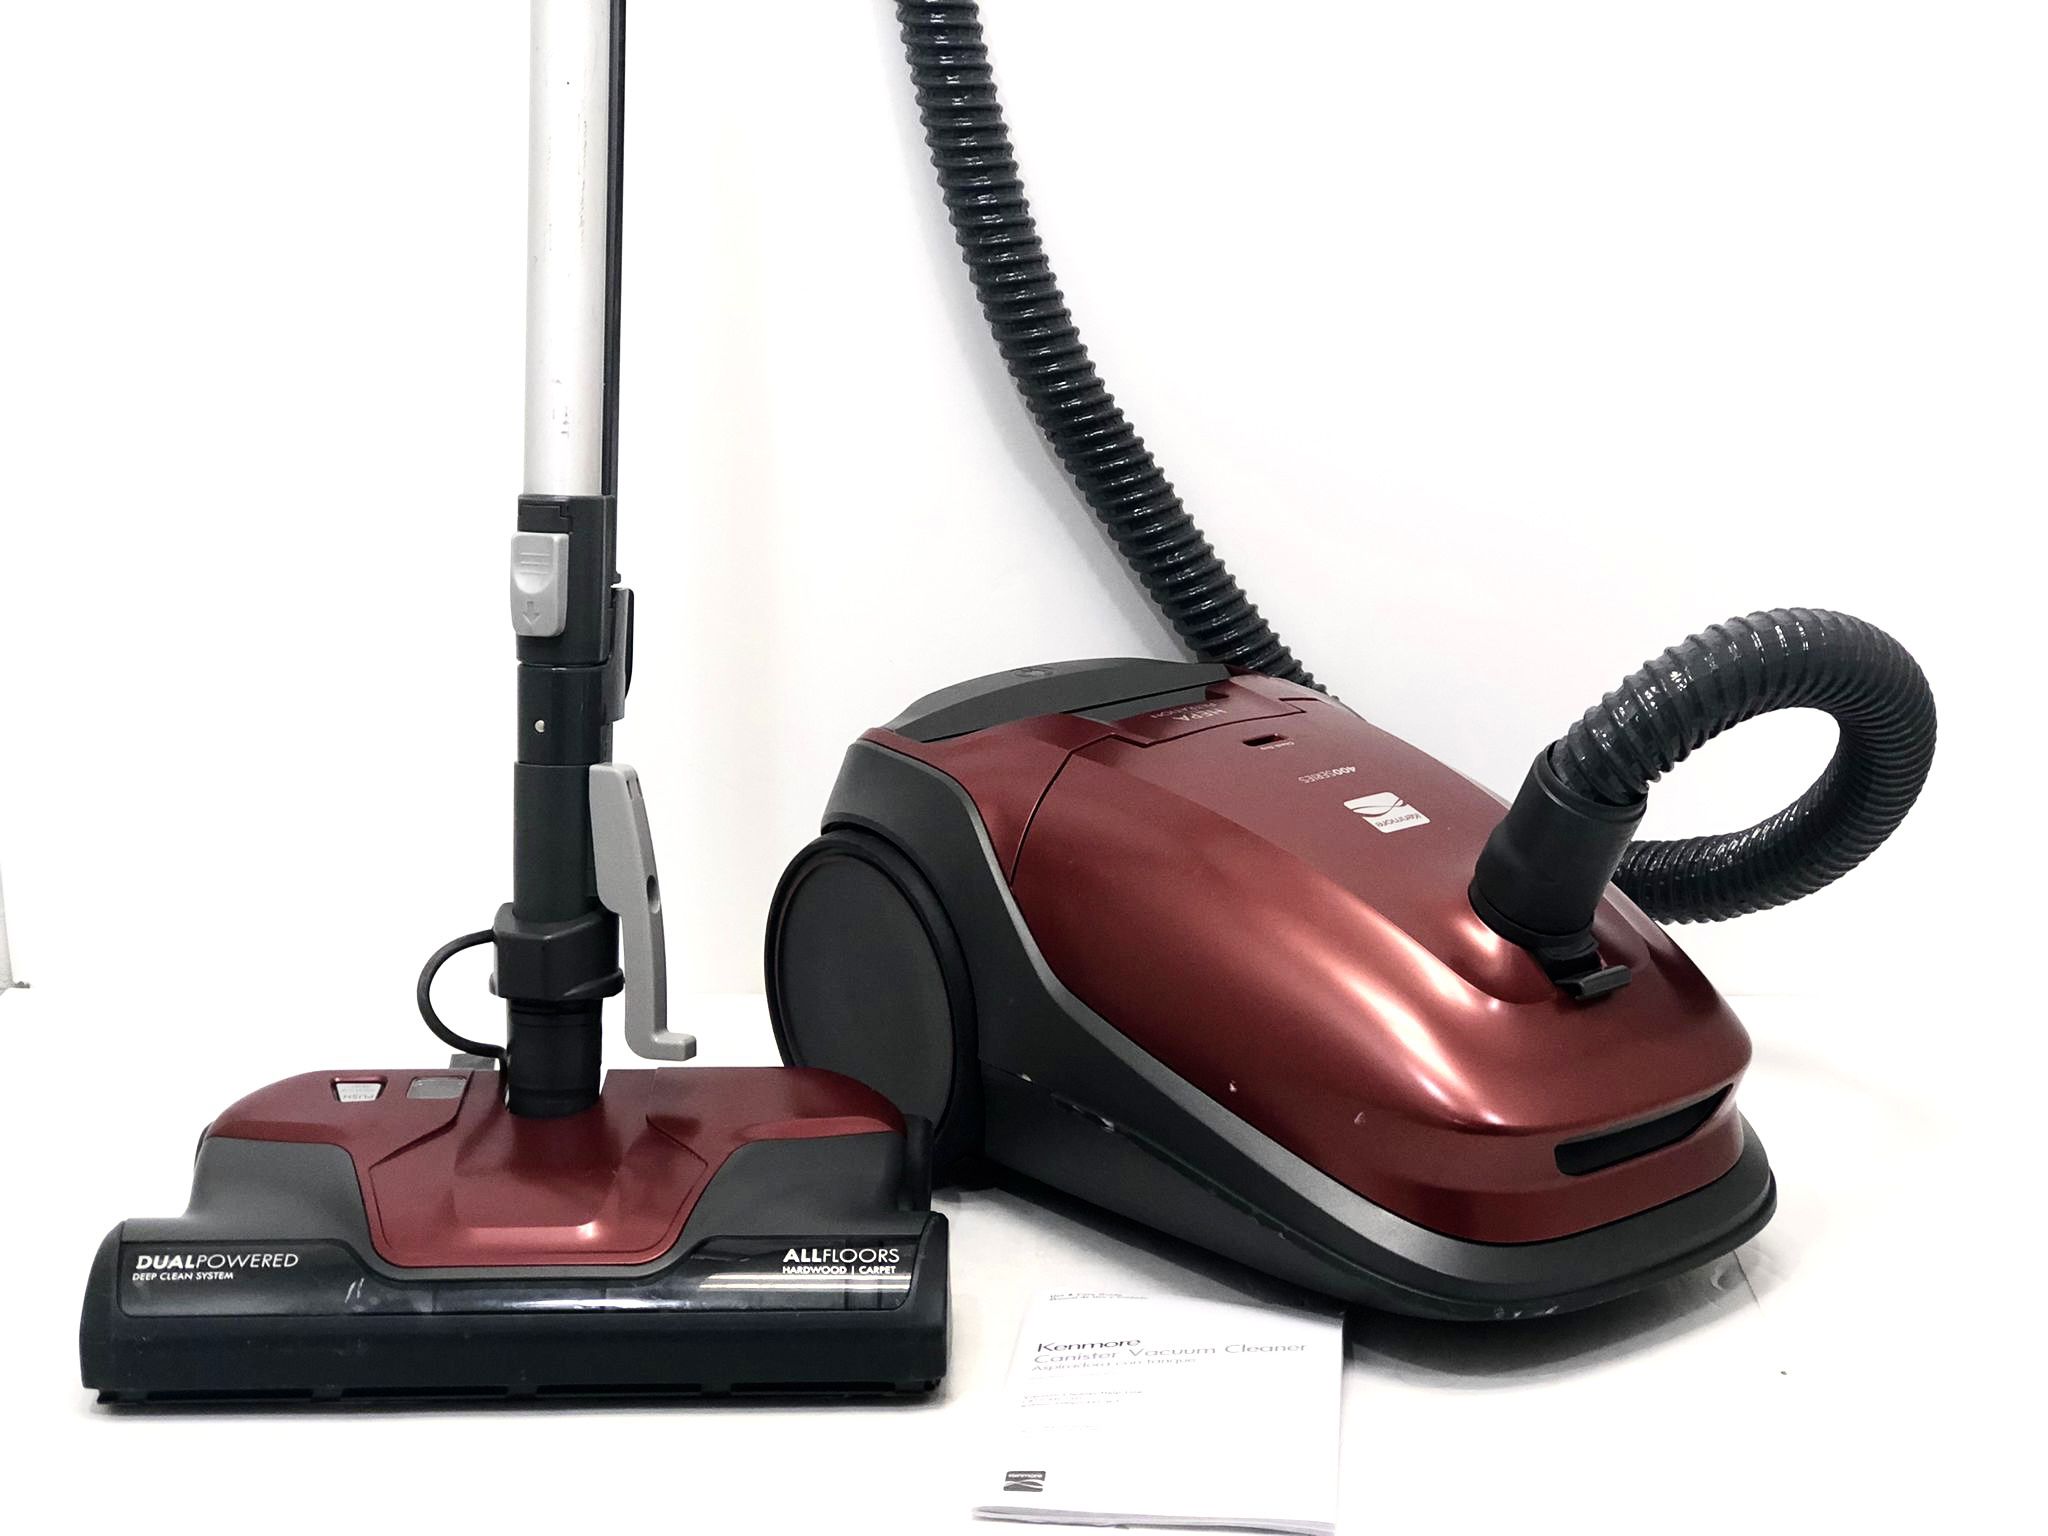 Kenmore 400 Series Pet Friendly Lightweight Bagged Canister Vacuum with Extended Telescoping Wand, HEPA, Retractable Cord